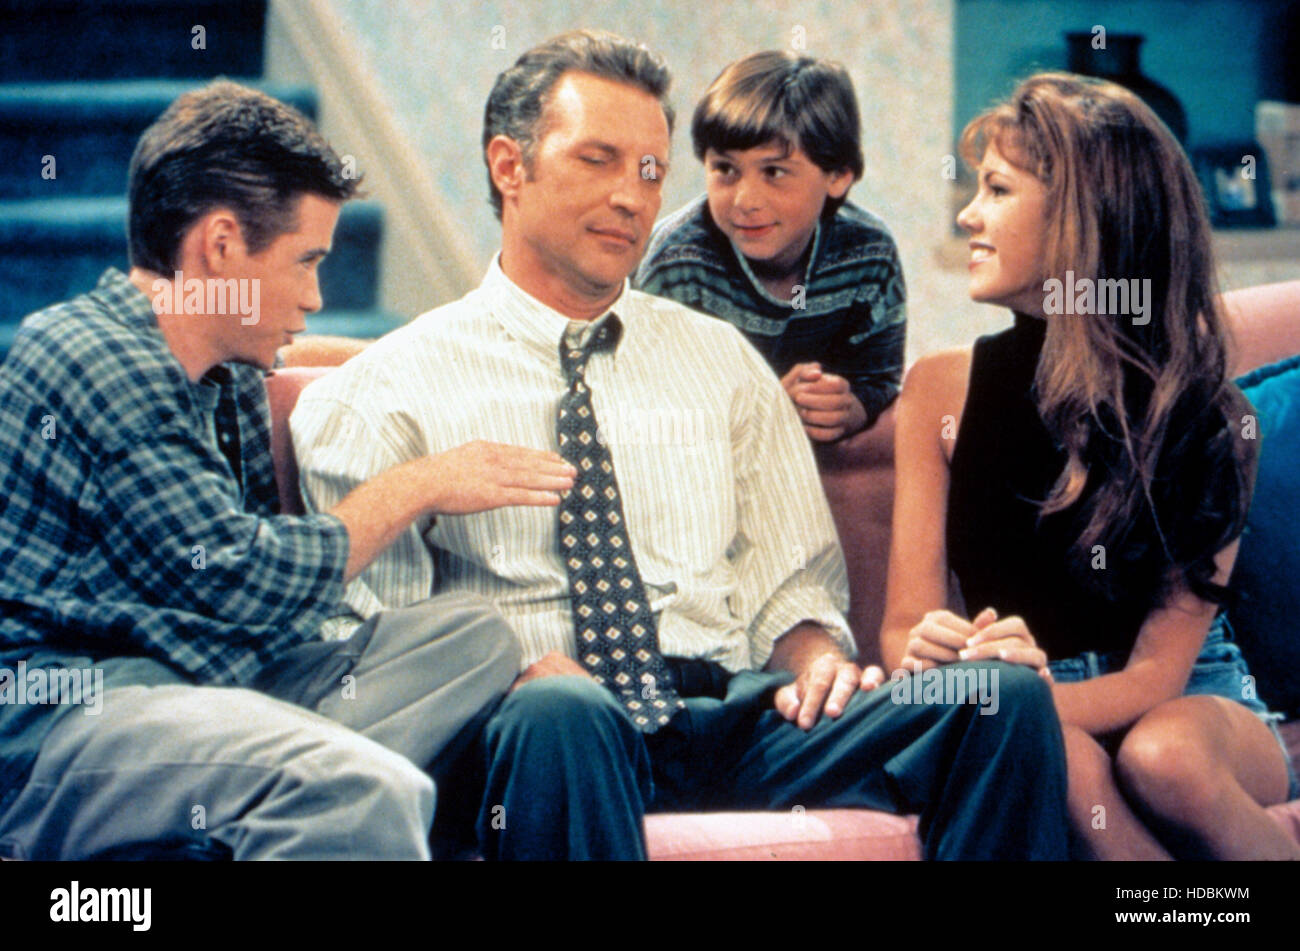 UNHAPPILY EVER AFTER, Kevin Connolly, Geoffrey Pierson, Justin Berfie, Nikki Cox, 1995-1999. © Touchstone TV /Courtesy Everett Stock Photo